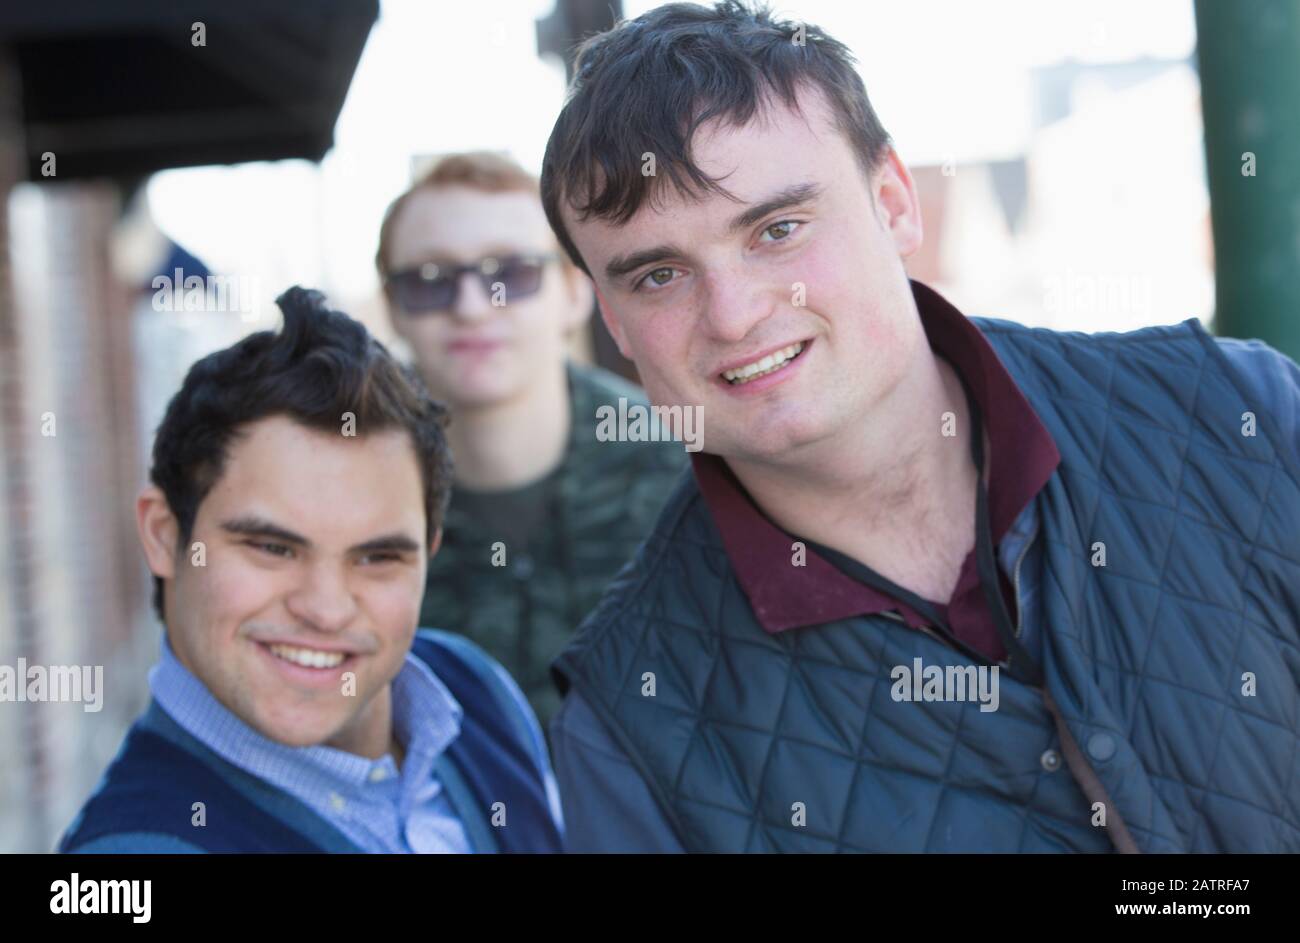 Middle Eastern man with Down Syndrome and two friends, each having a Learning Disability Stock Photo